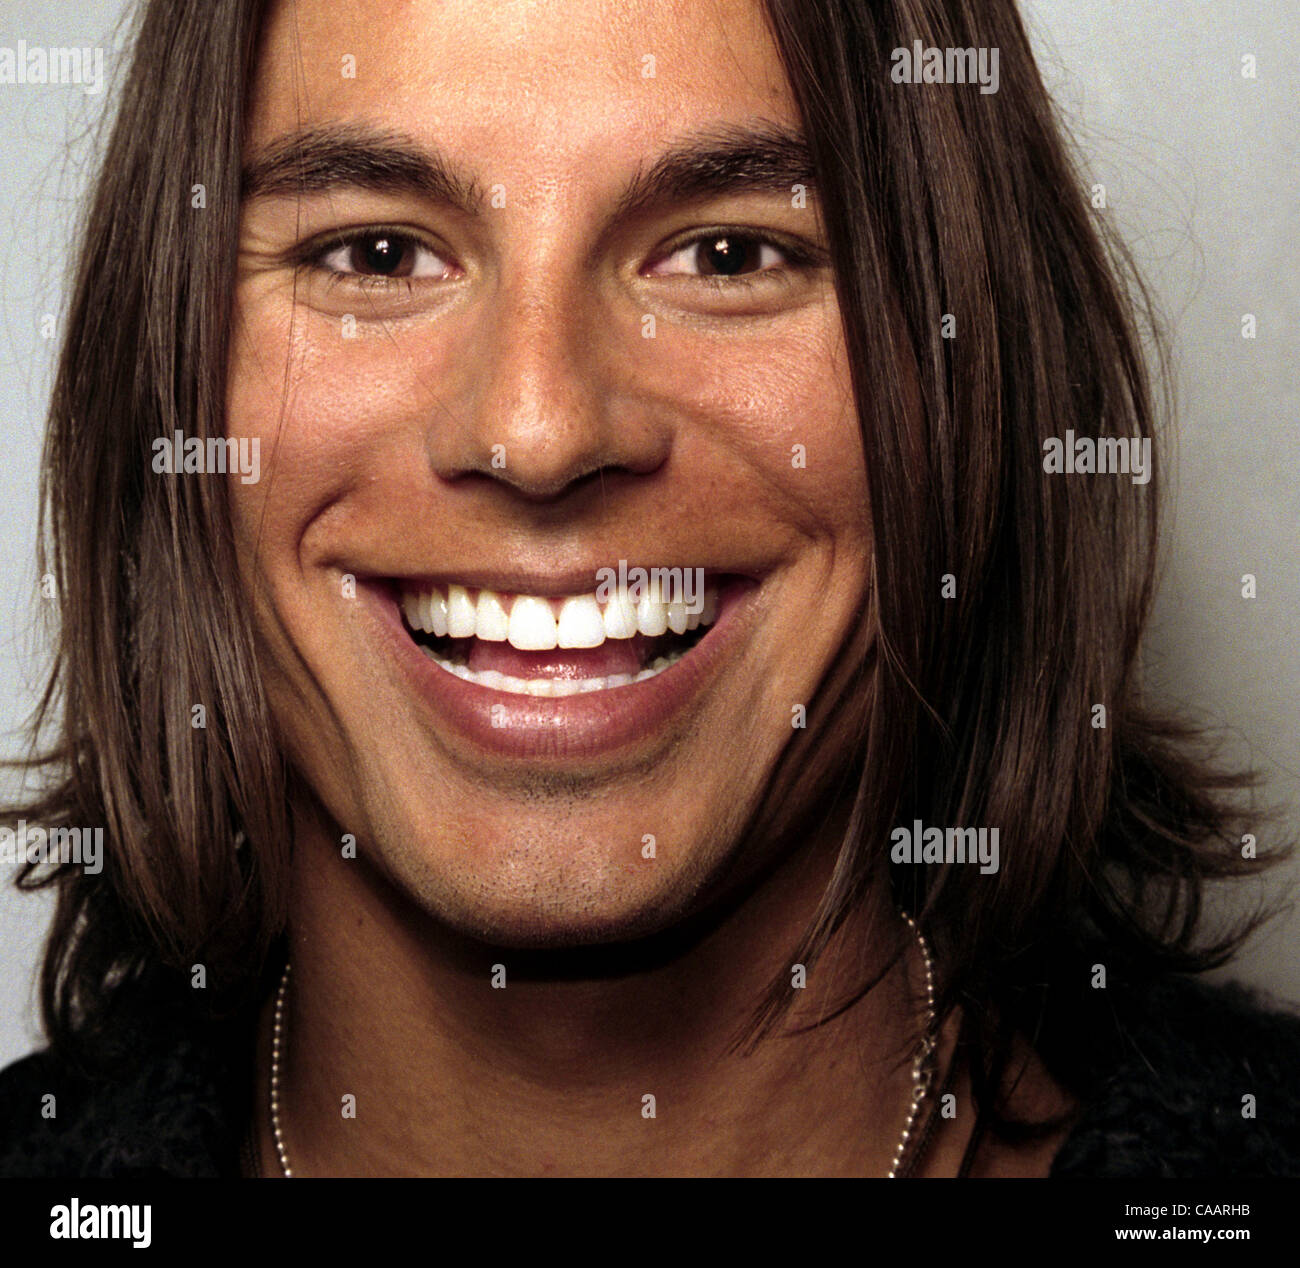 Feb 01, 2004 - Miami, FL, USA -  Julio JosŽ Iglesias also known as JULIO IGLEASIAS JR is a pop singer from Spain. Pictured February 2004 in South Florida. (Credit Image: © David Jacobs/ZUMA Press) Stock Photo